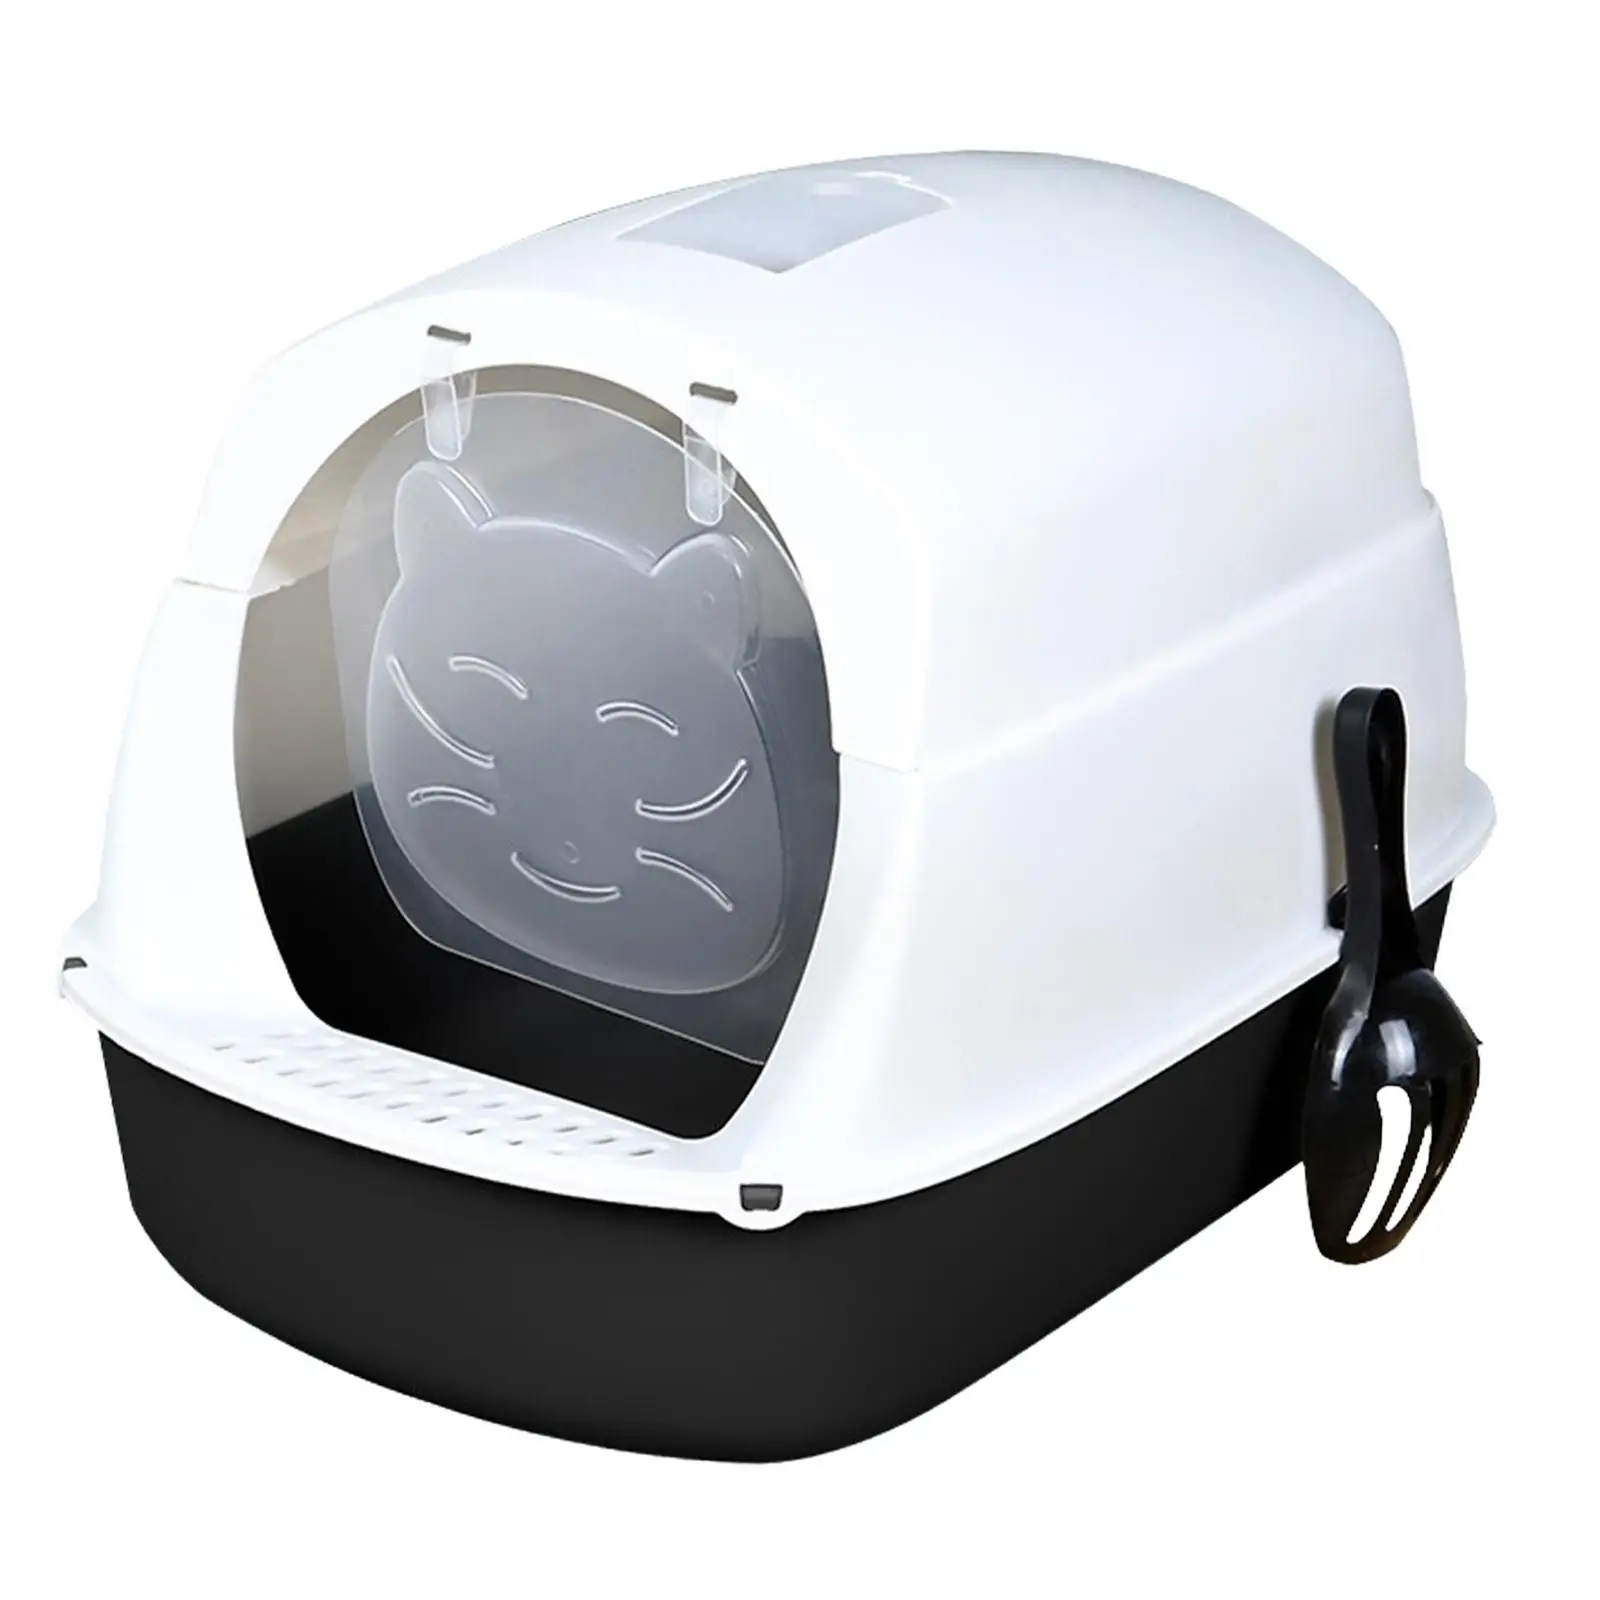 Hooded Cat Litter Box Enclosed and Covered Cat Toilet with Front Door Flap Removable Kitten Potty Kitty Litter Tray Pet Supplies